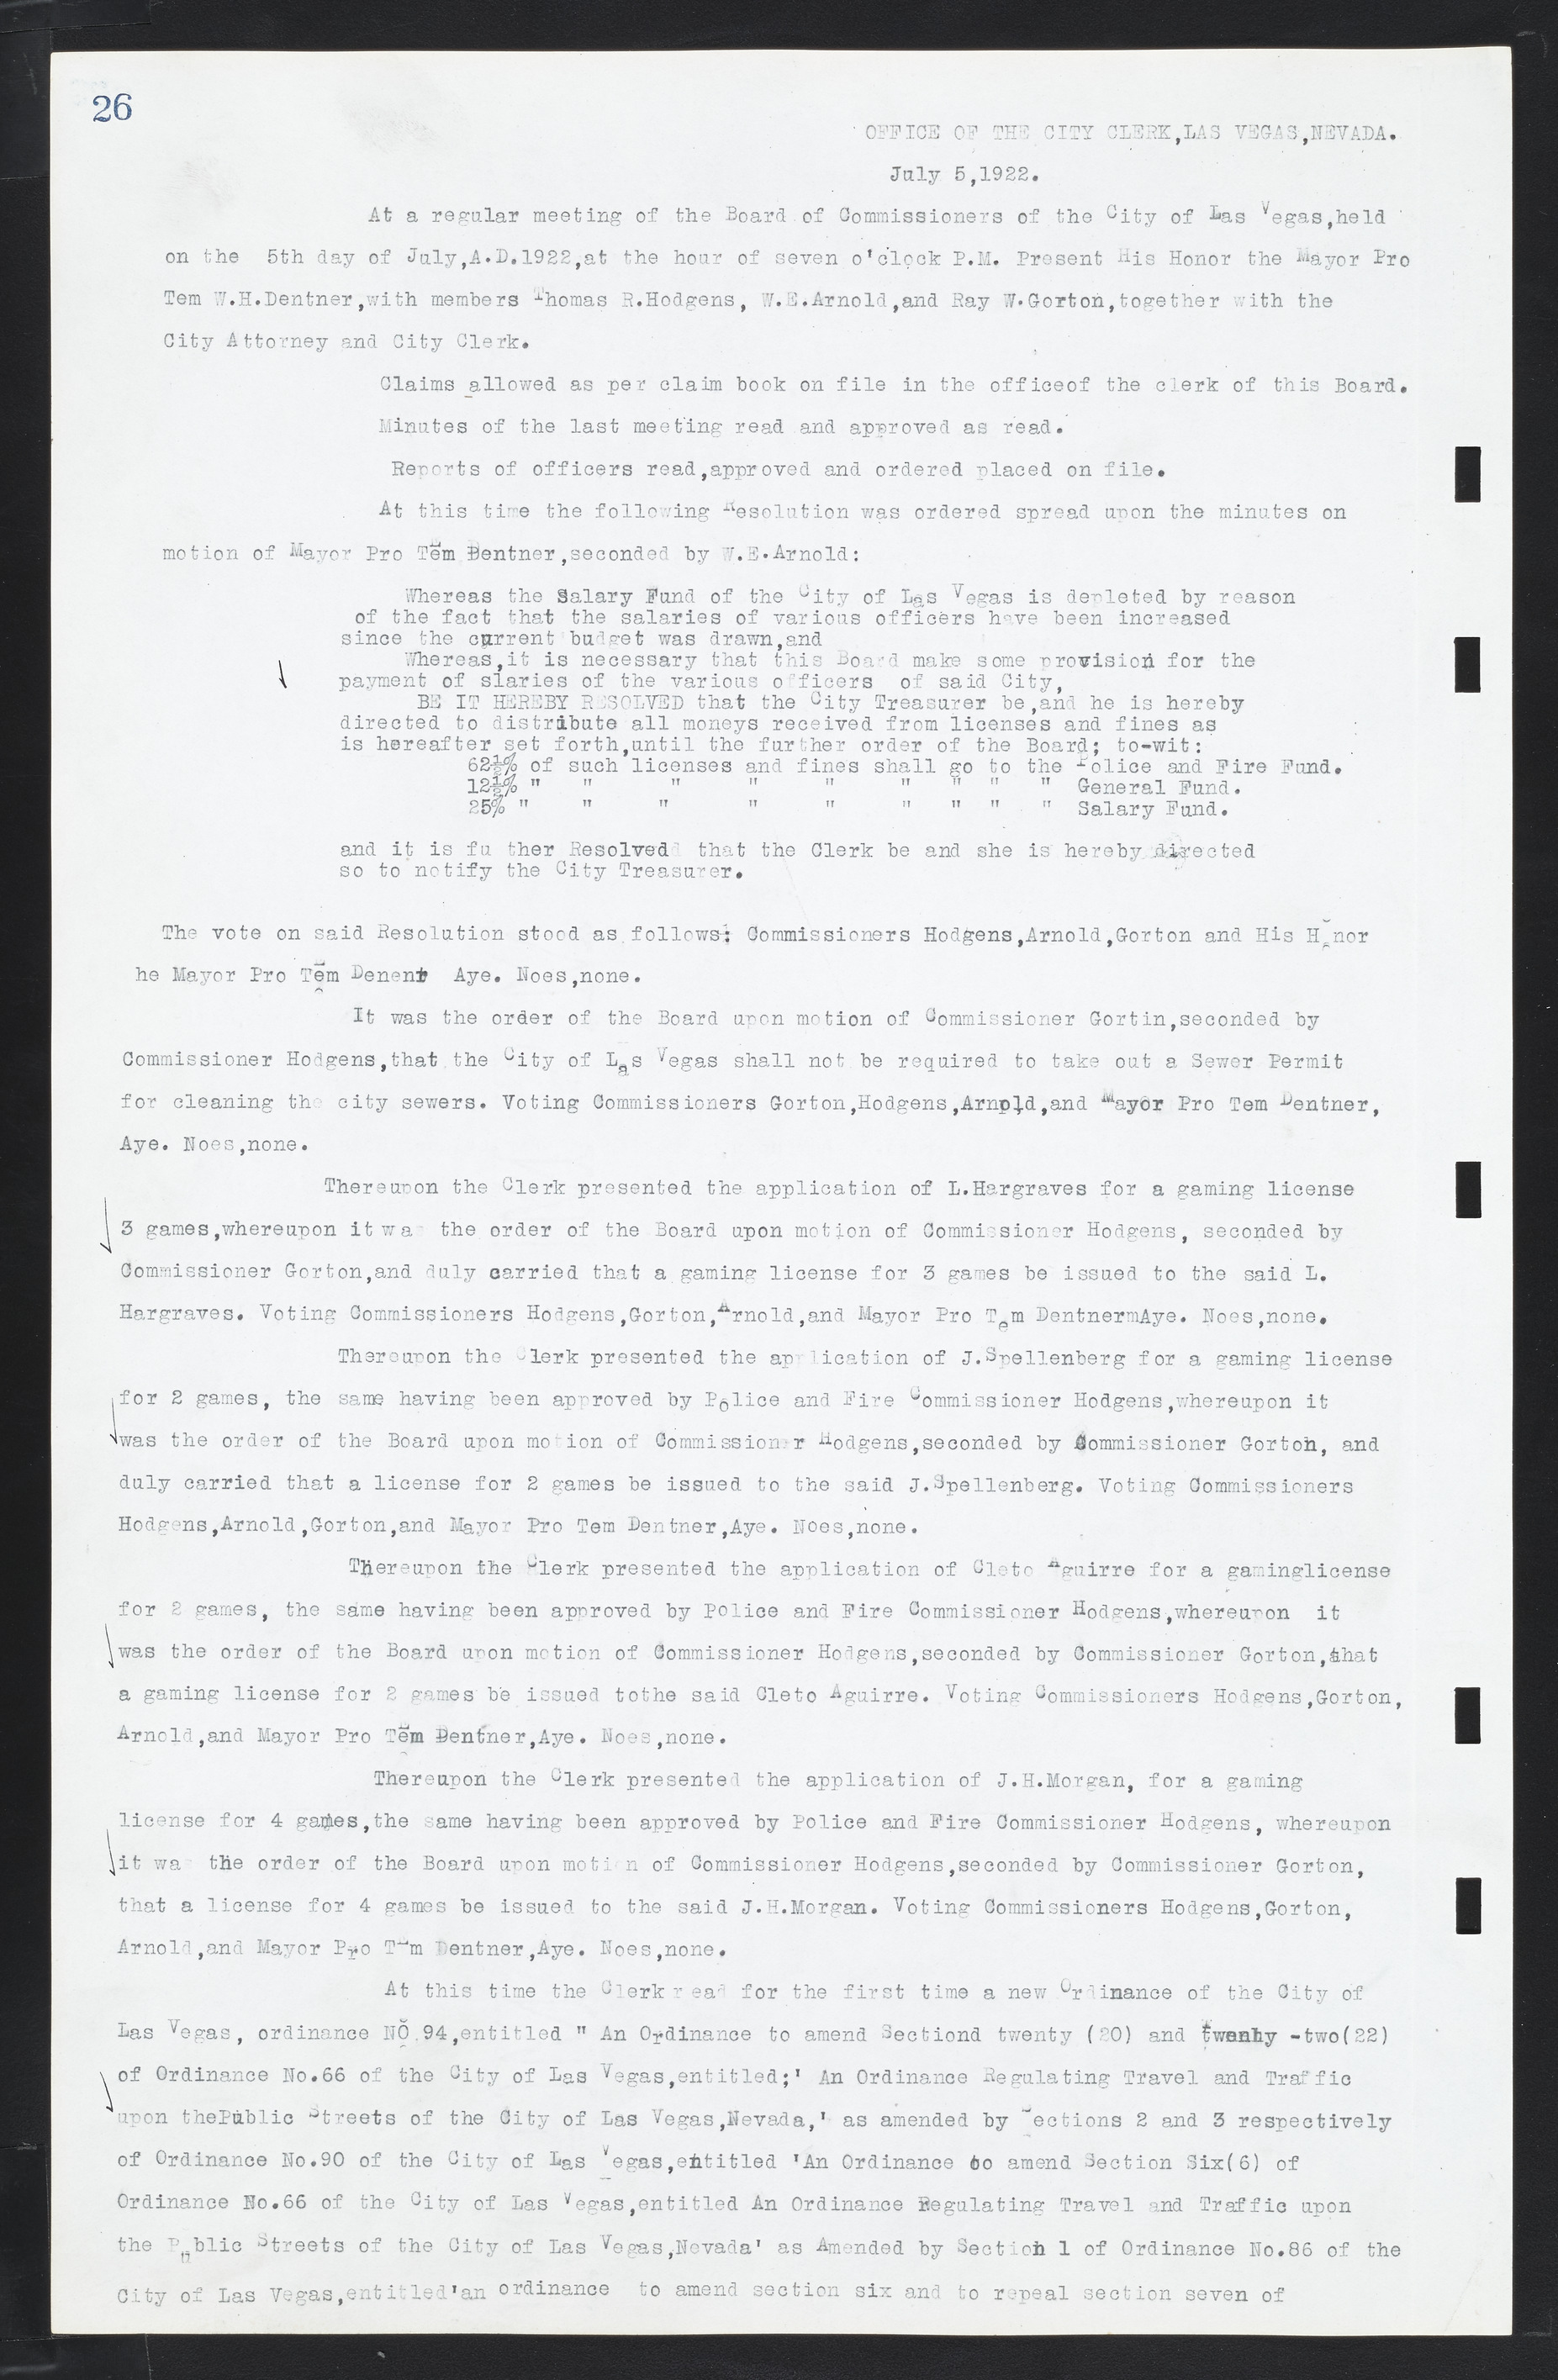 Las Vegas City Commission Minutes, March 1, 1922 to May 10, 1929, lvc000002-33